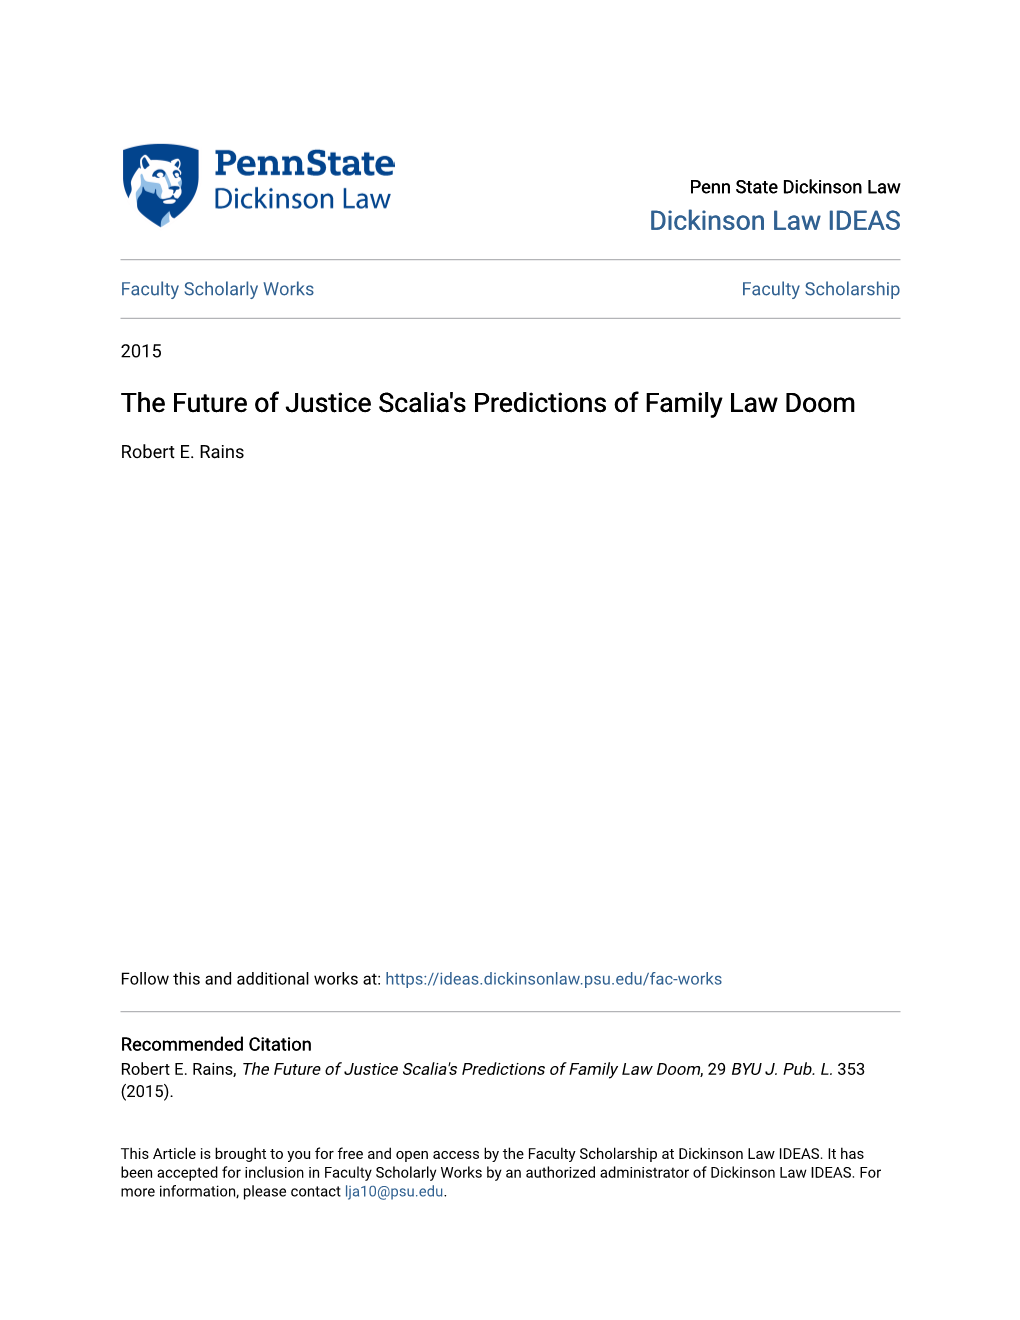 The Future of Justice Scalia's Predictions of Family Law Doom